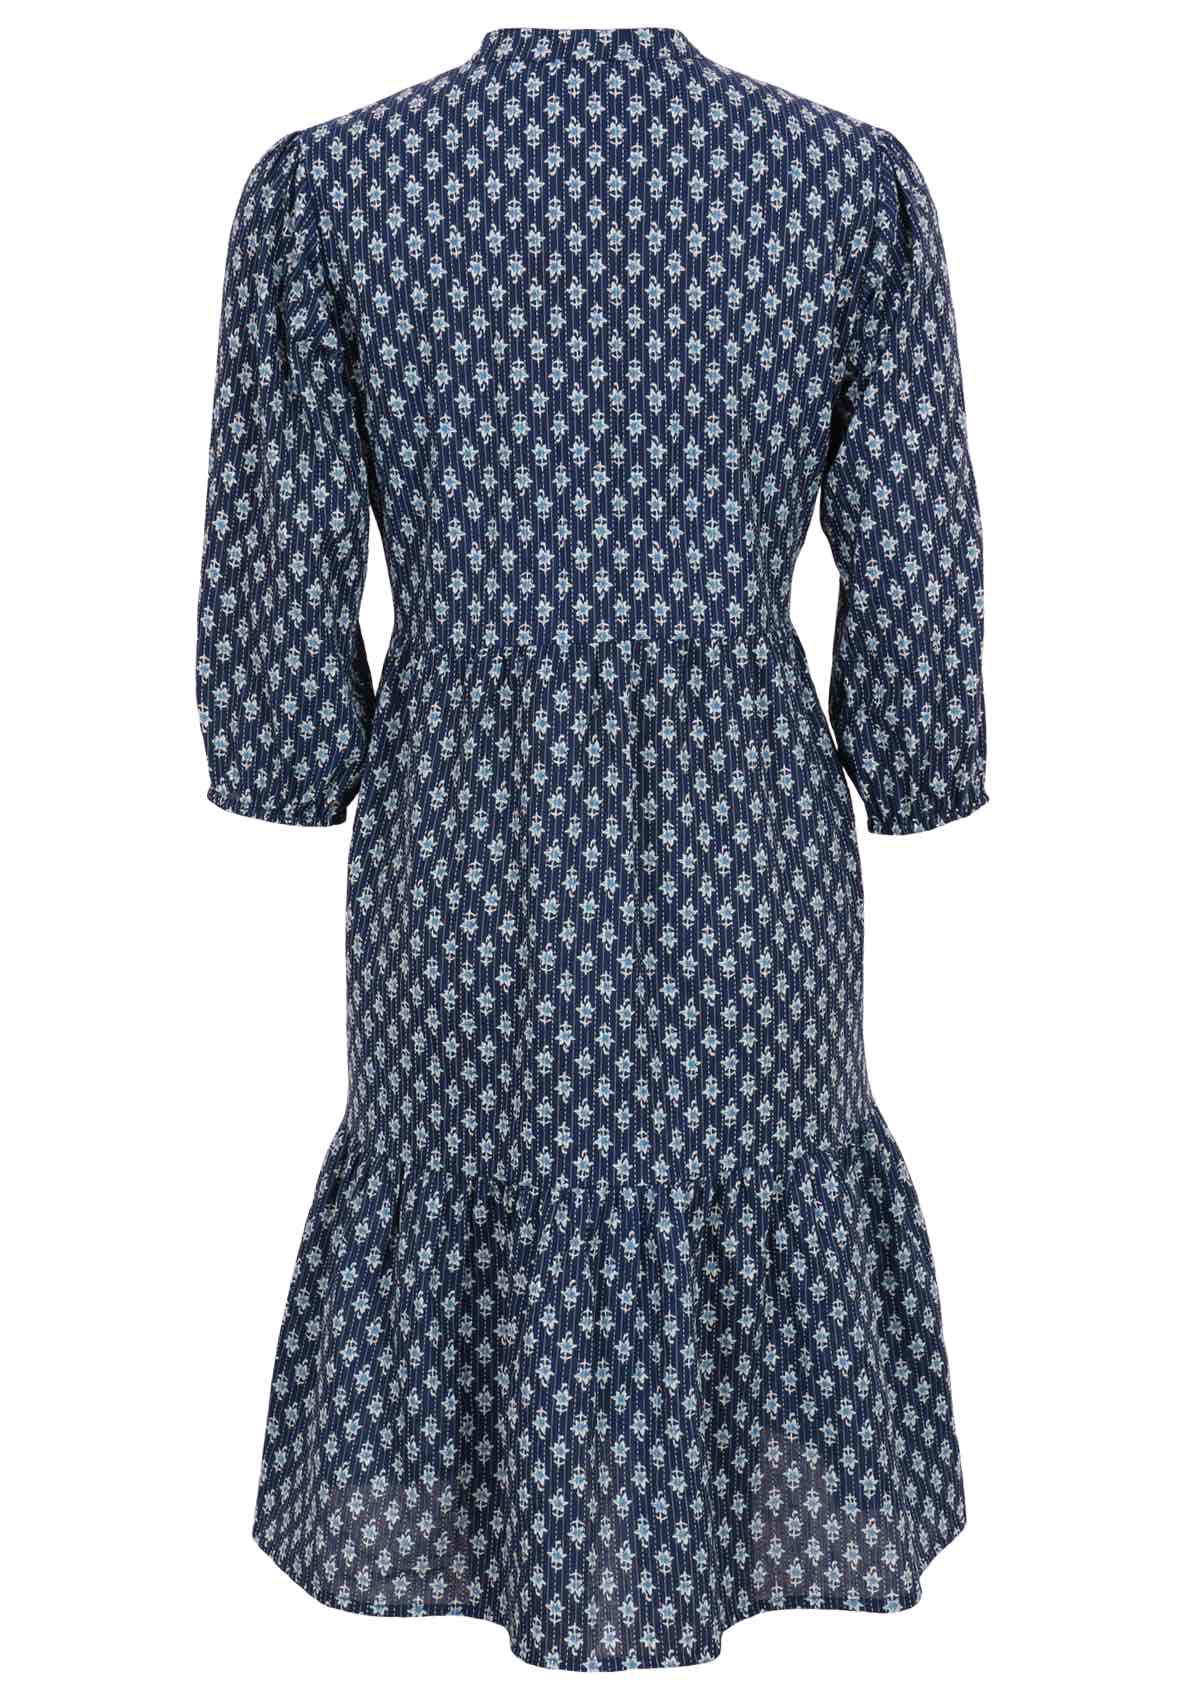 100% cotton midi dress features a blue floral pattern and 3/4 length sleeves.